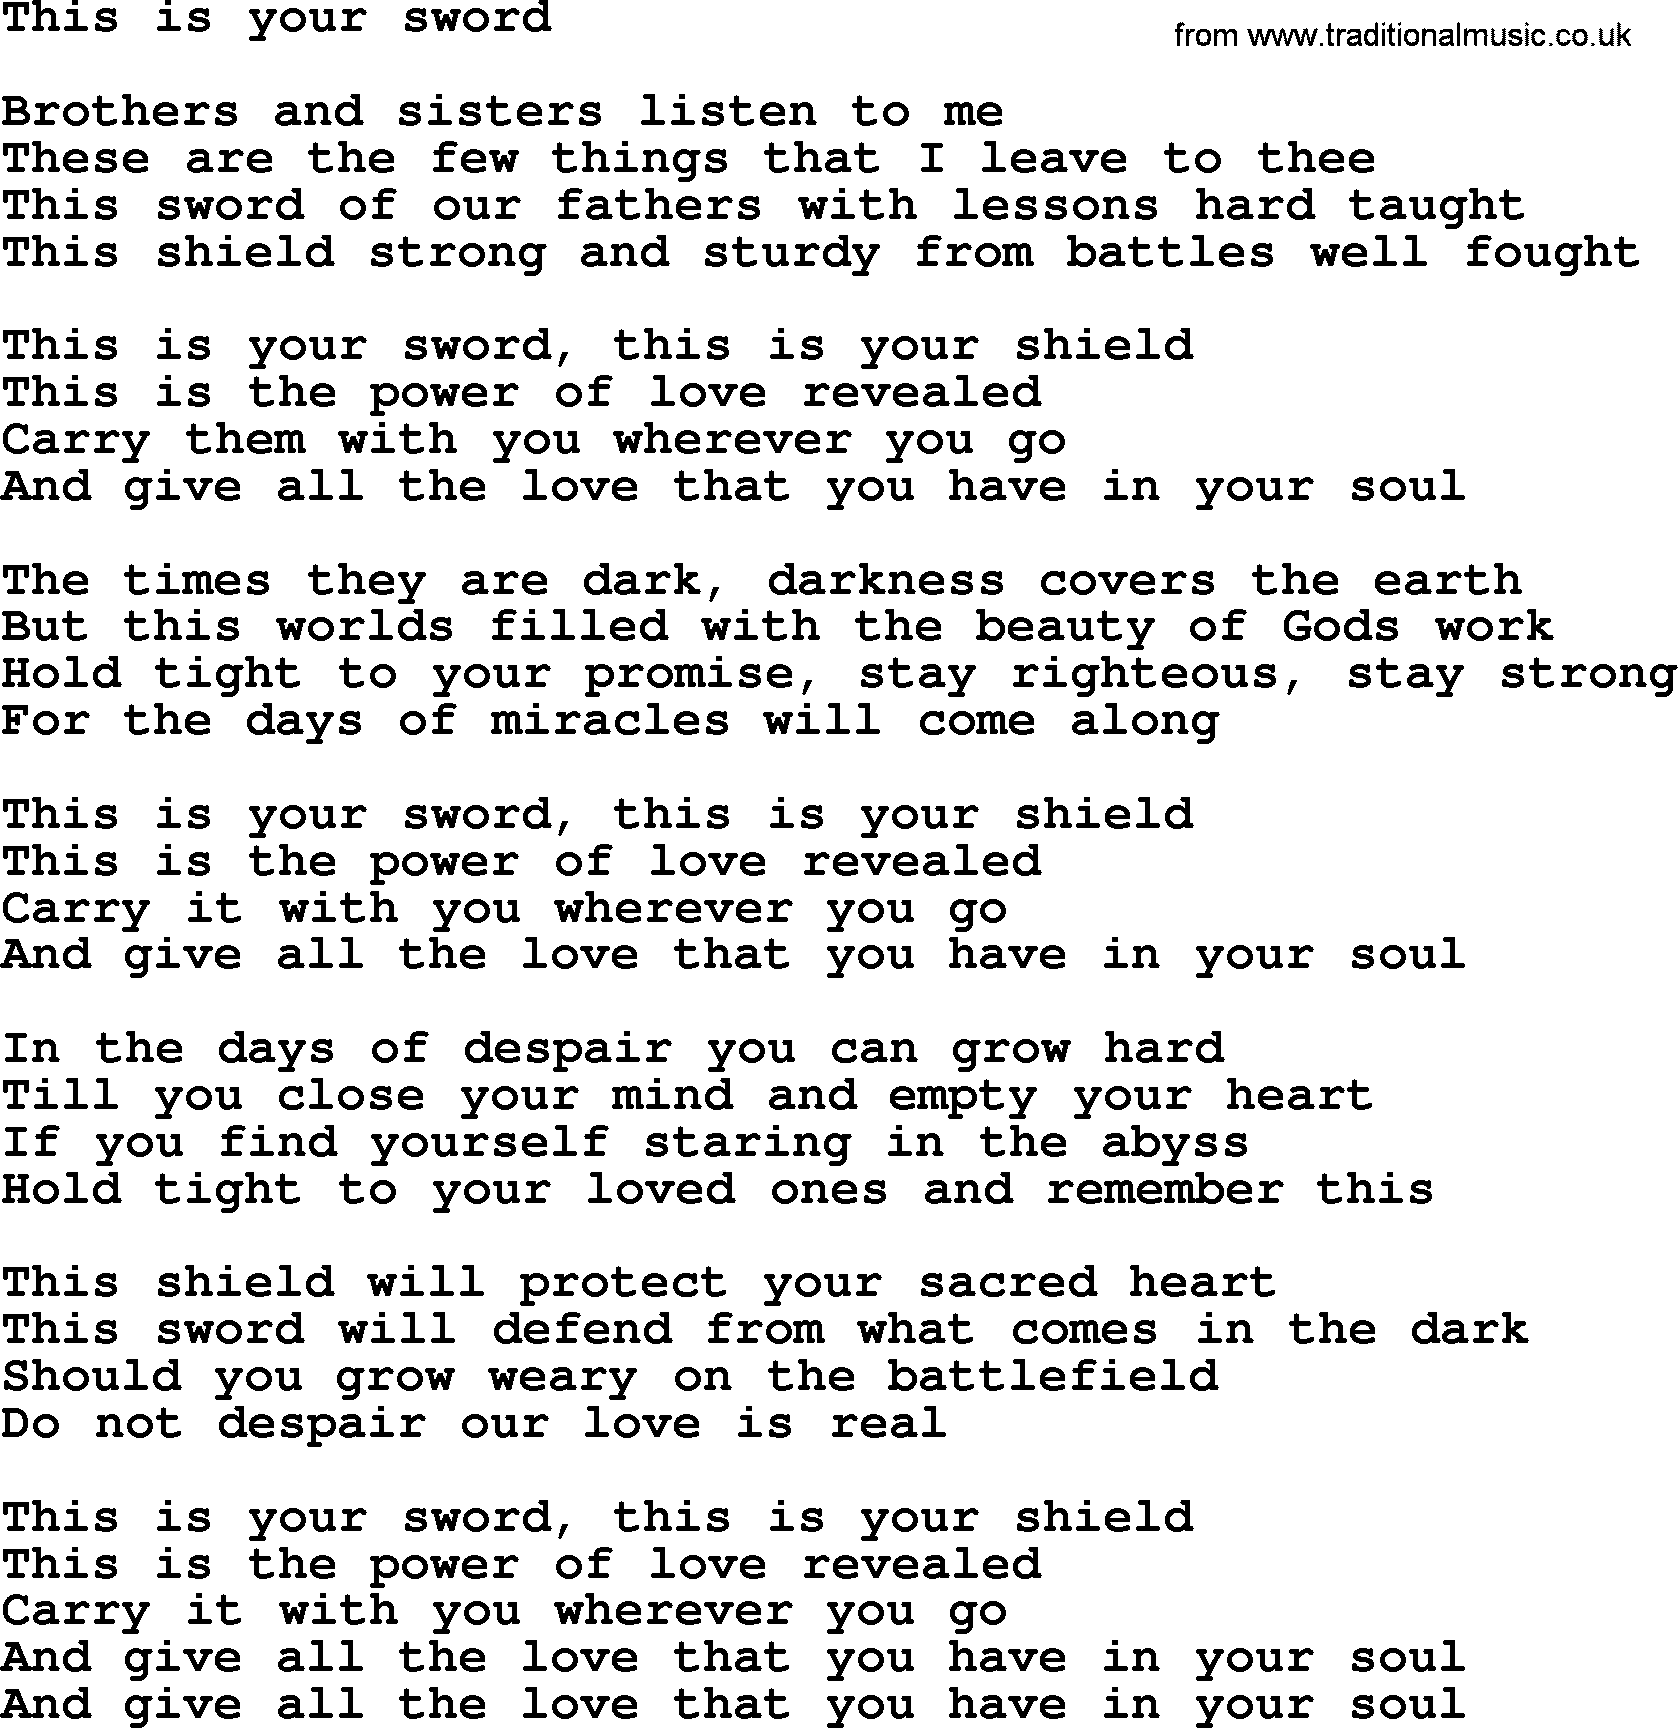 Bruce Springsteen song: This Is Your Sword lyrics